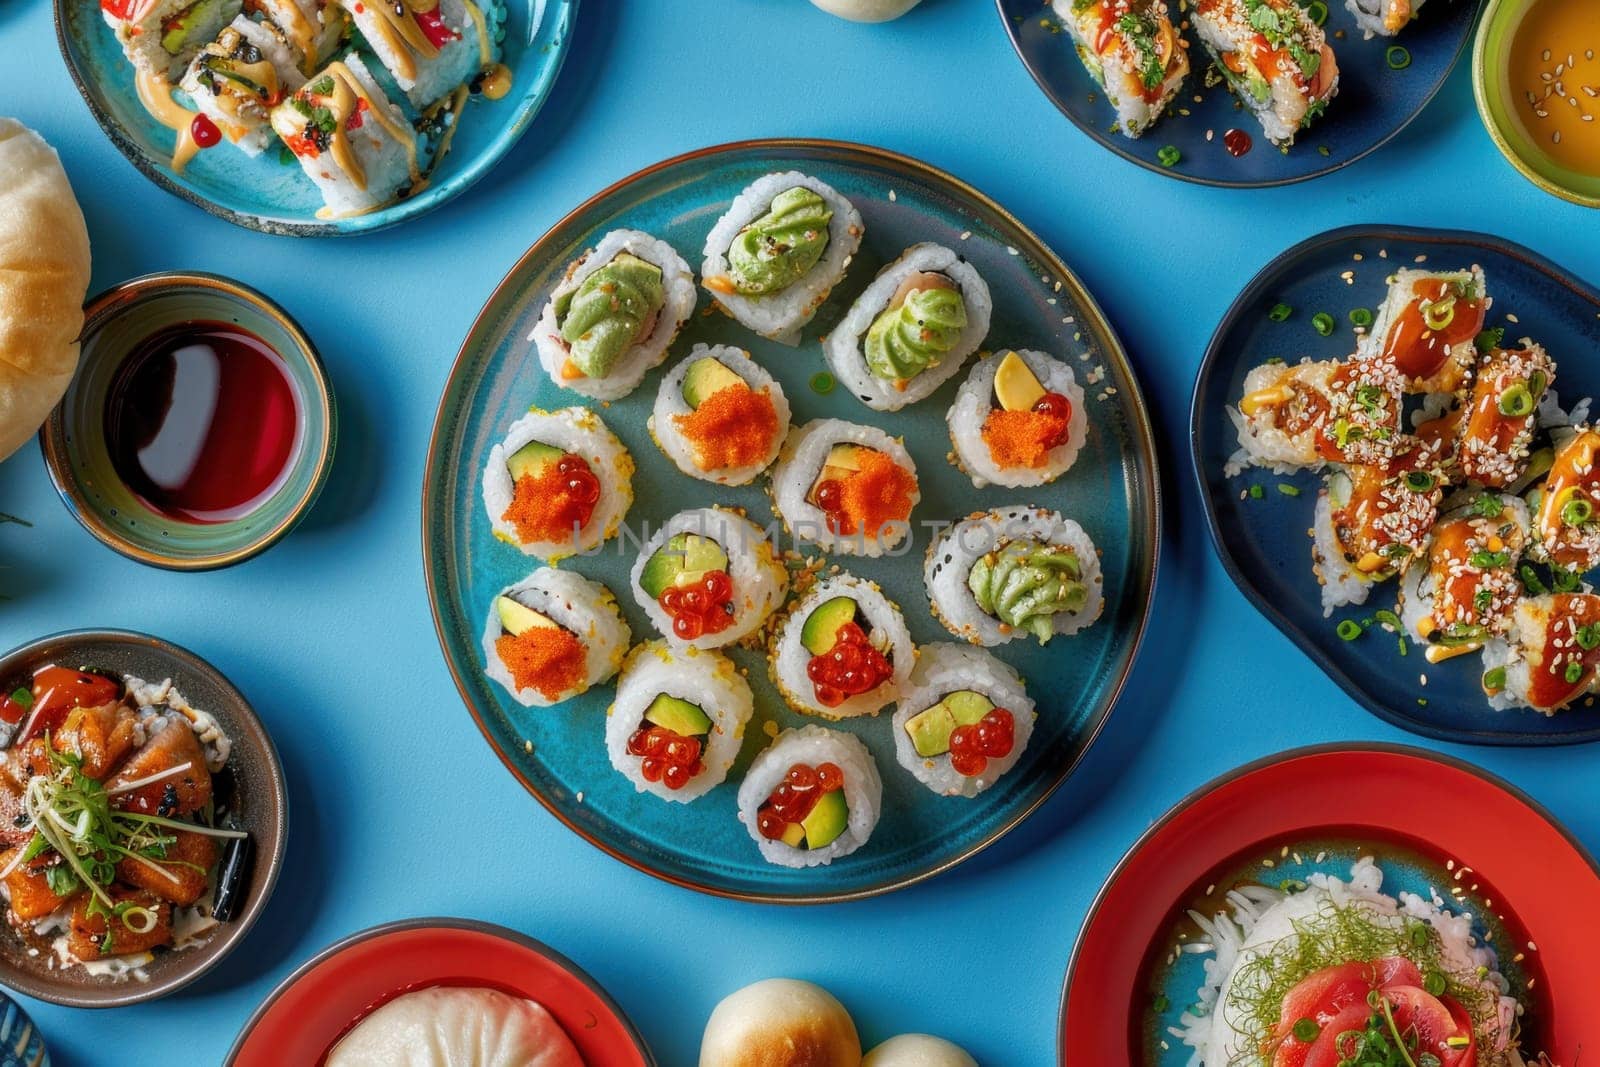 Various plates of sushi and other food on a blue table with a blue background for a culinary adventure